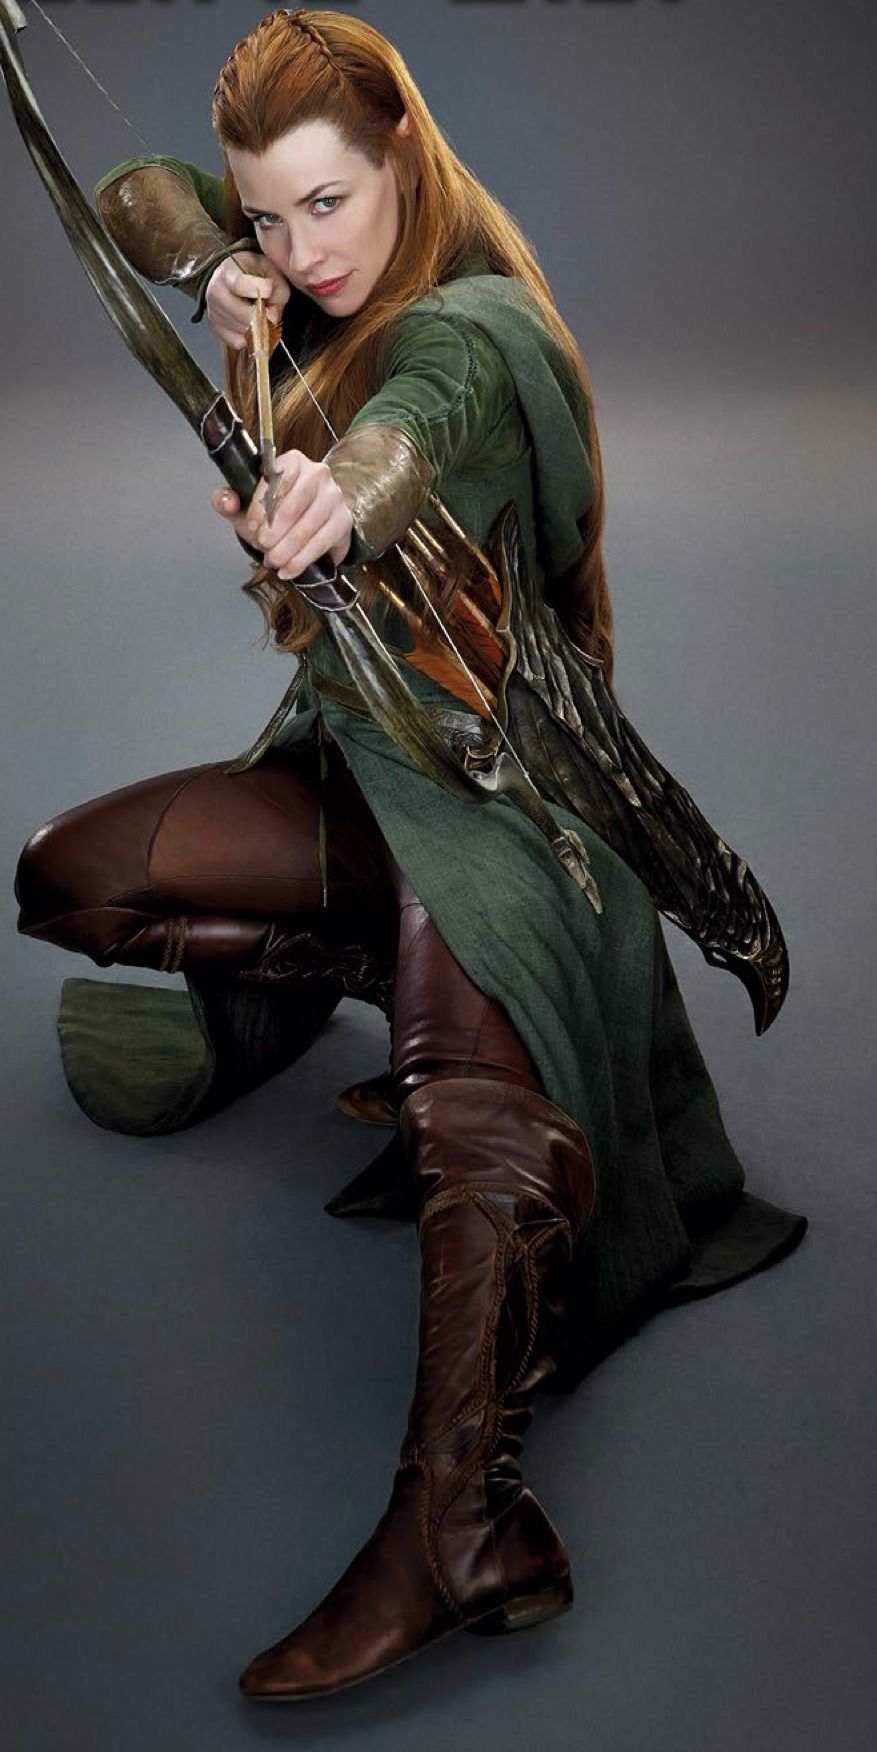 Pin By Bodo On More Movies The Hobbit Movies Tauriel Warrior Woman